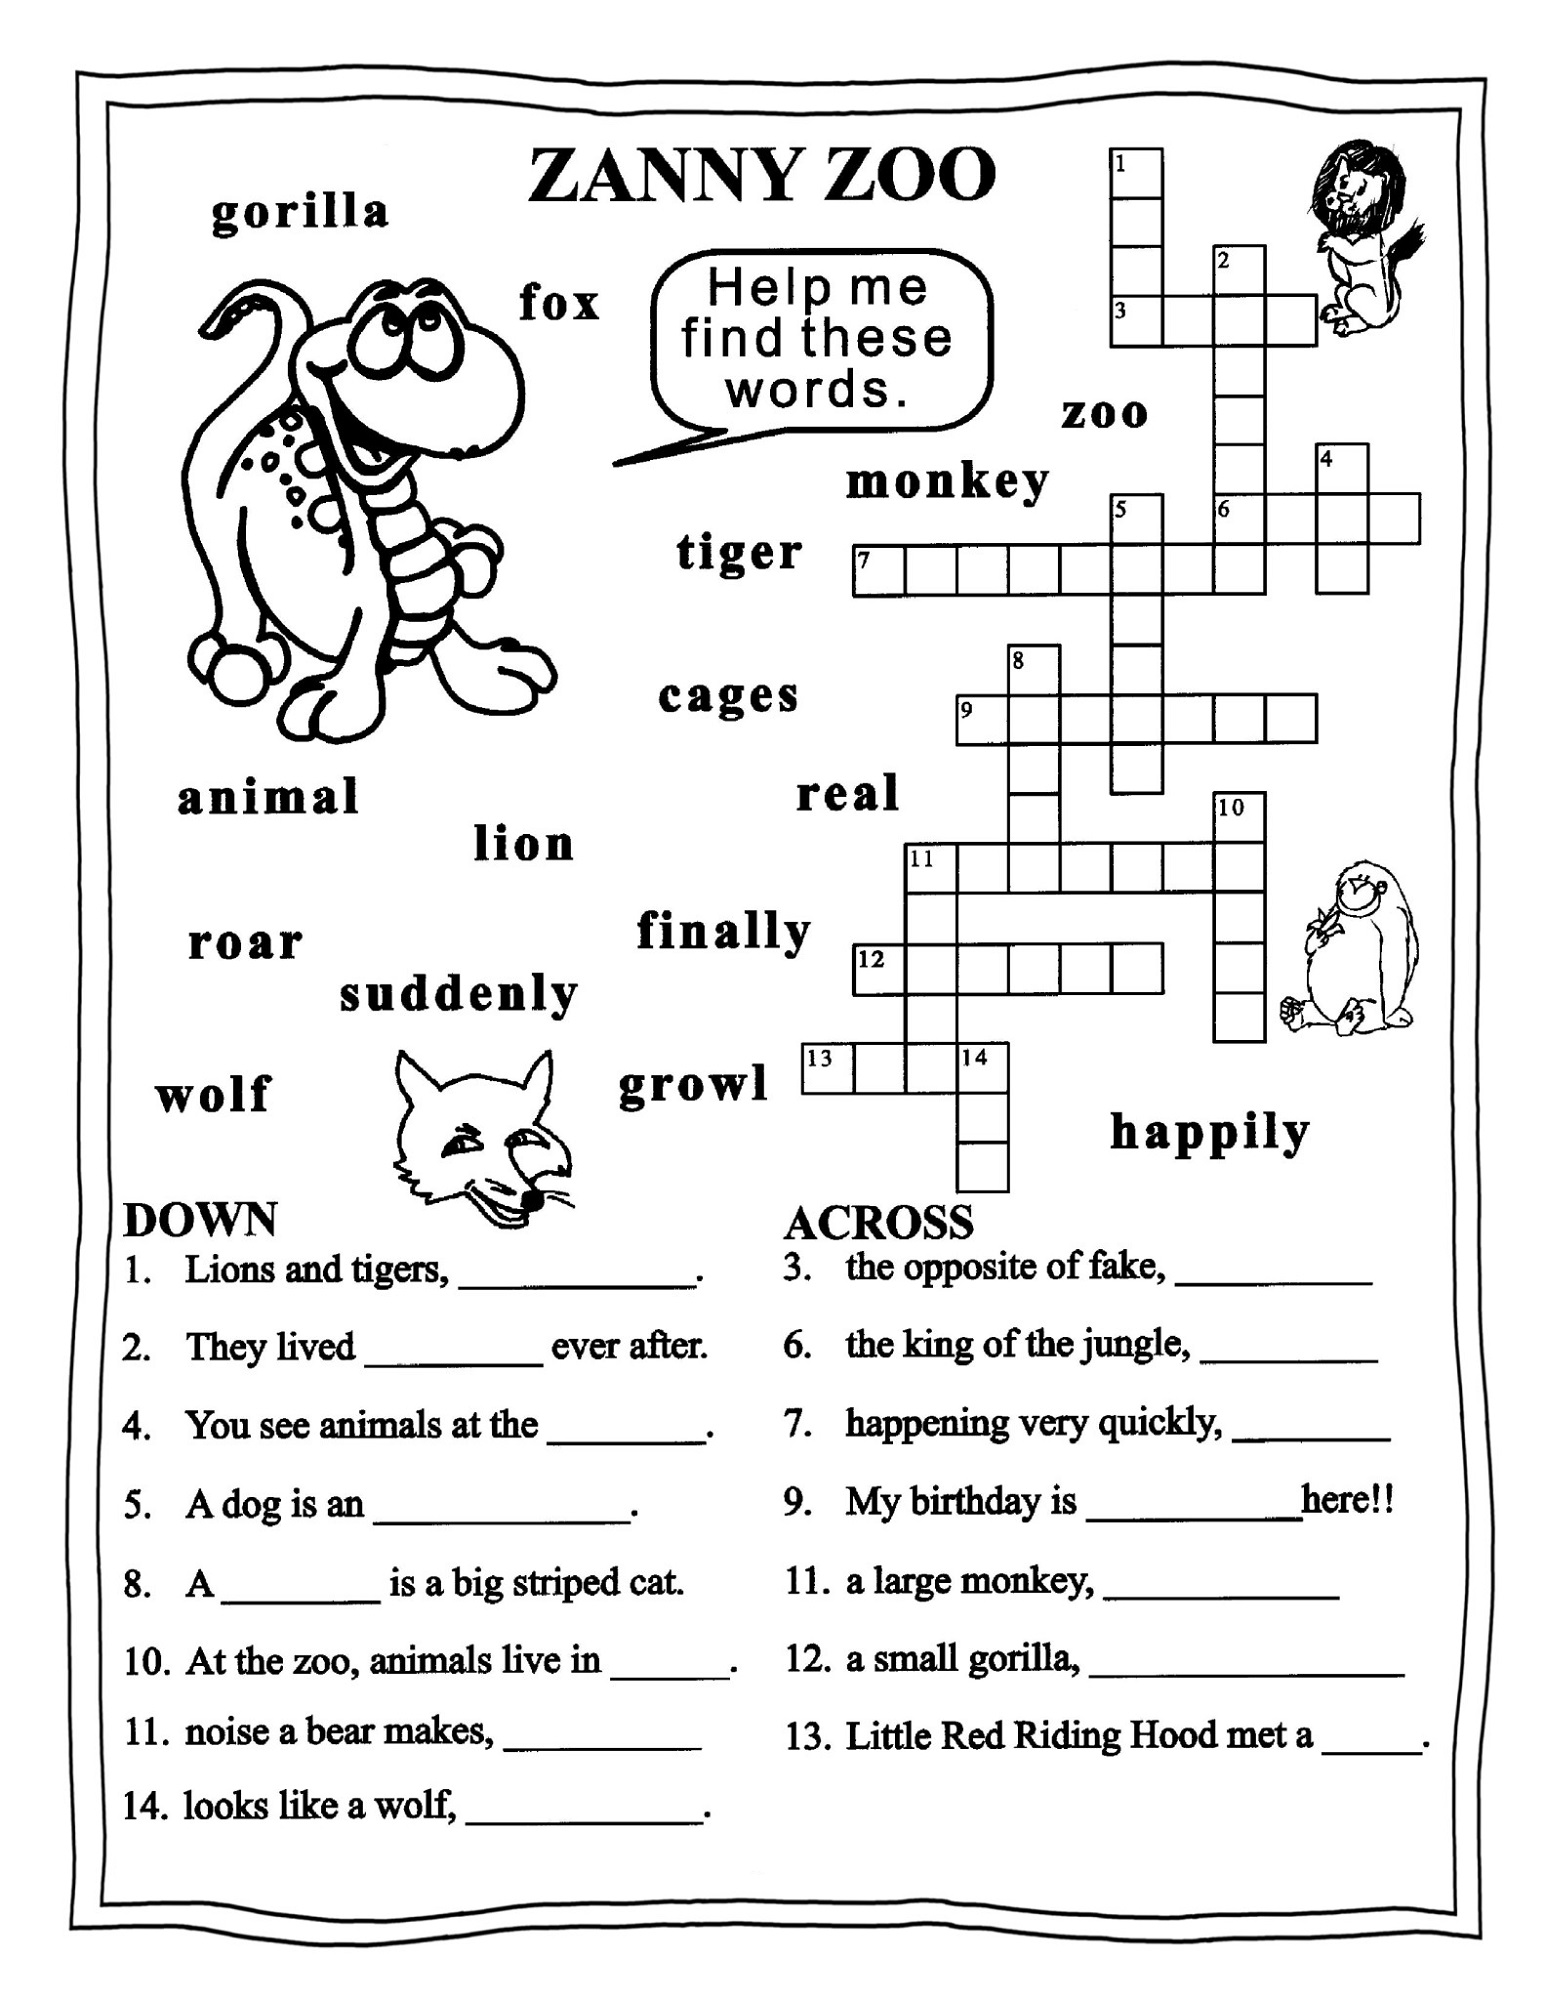 free-worksheets-for-grade-3-learning-printable-grade-3-english-worksheets-db-excelcom-milton